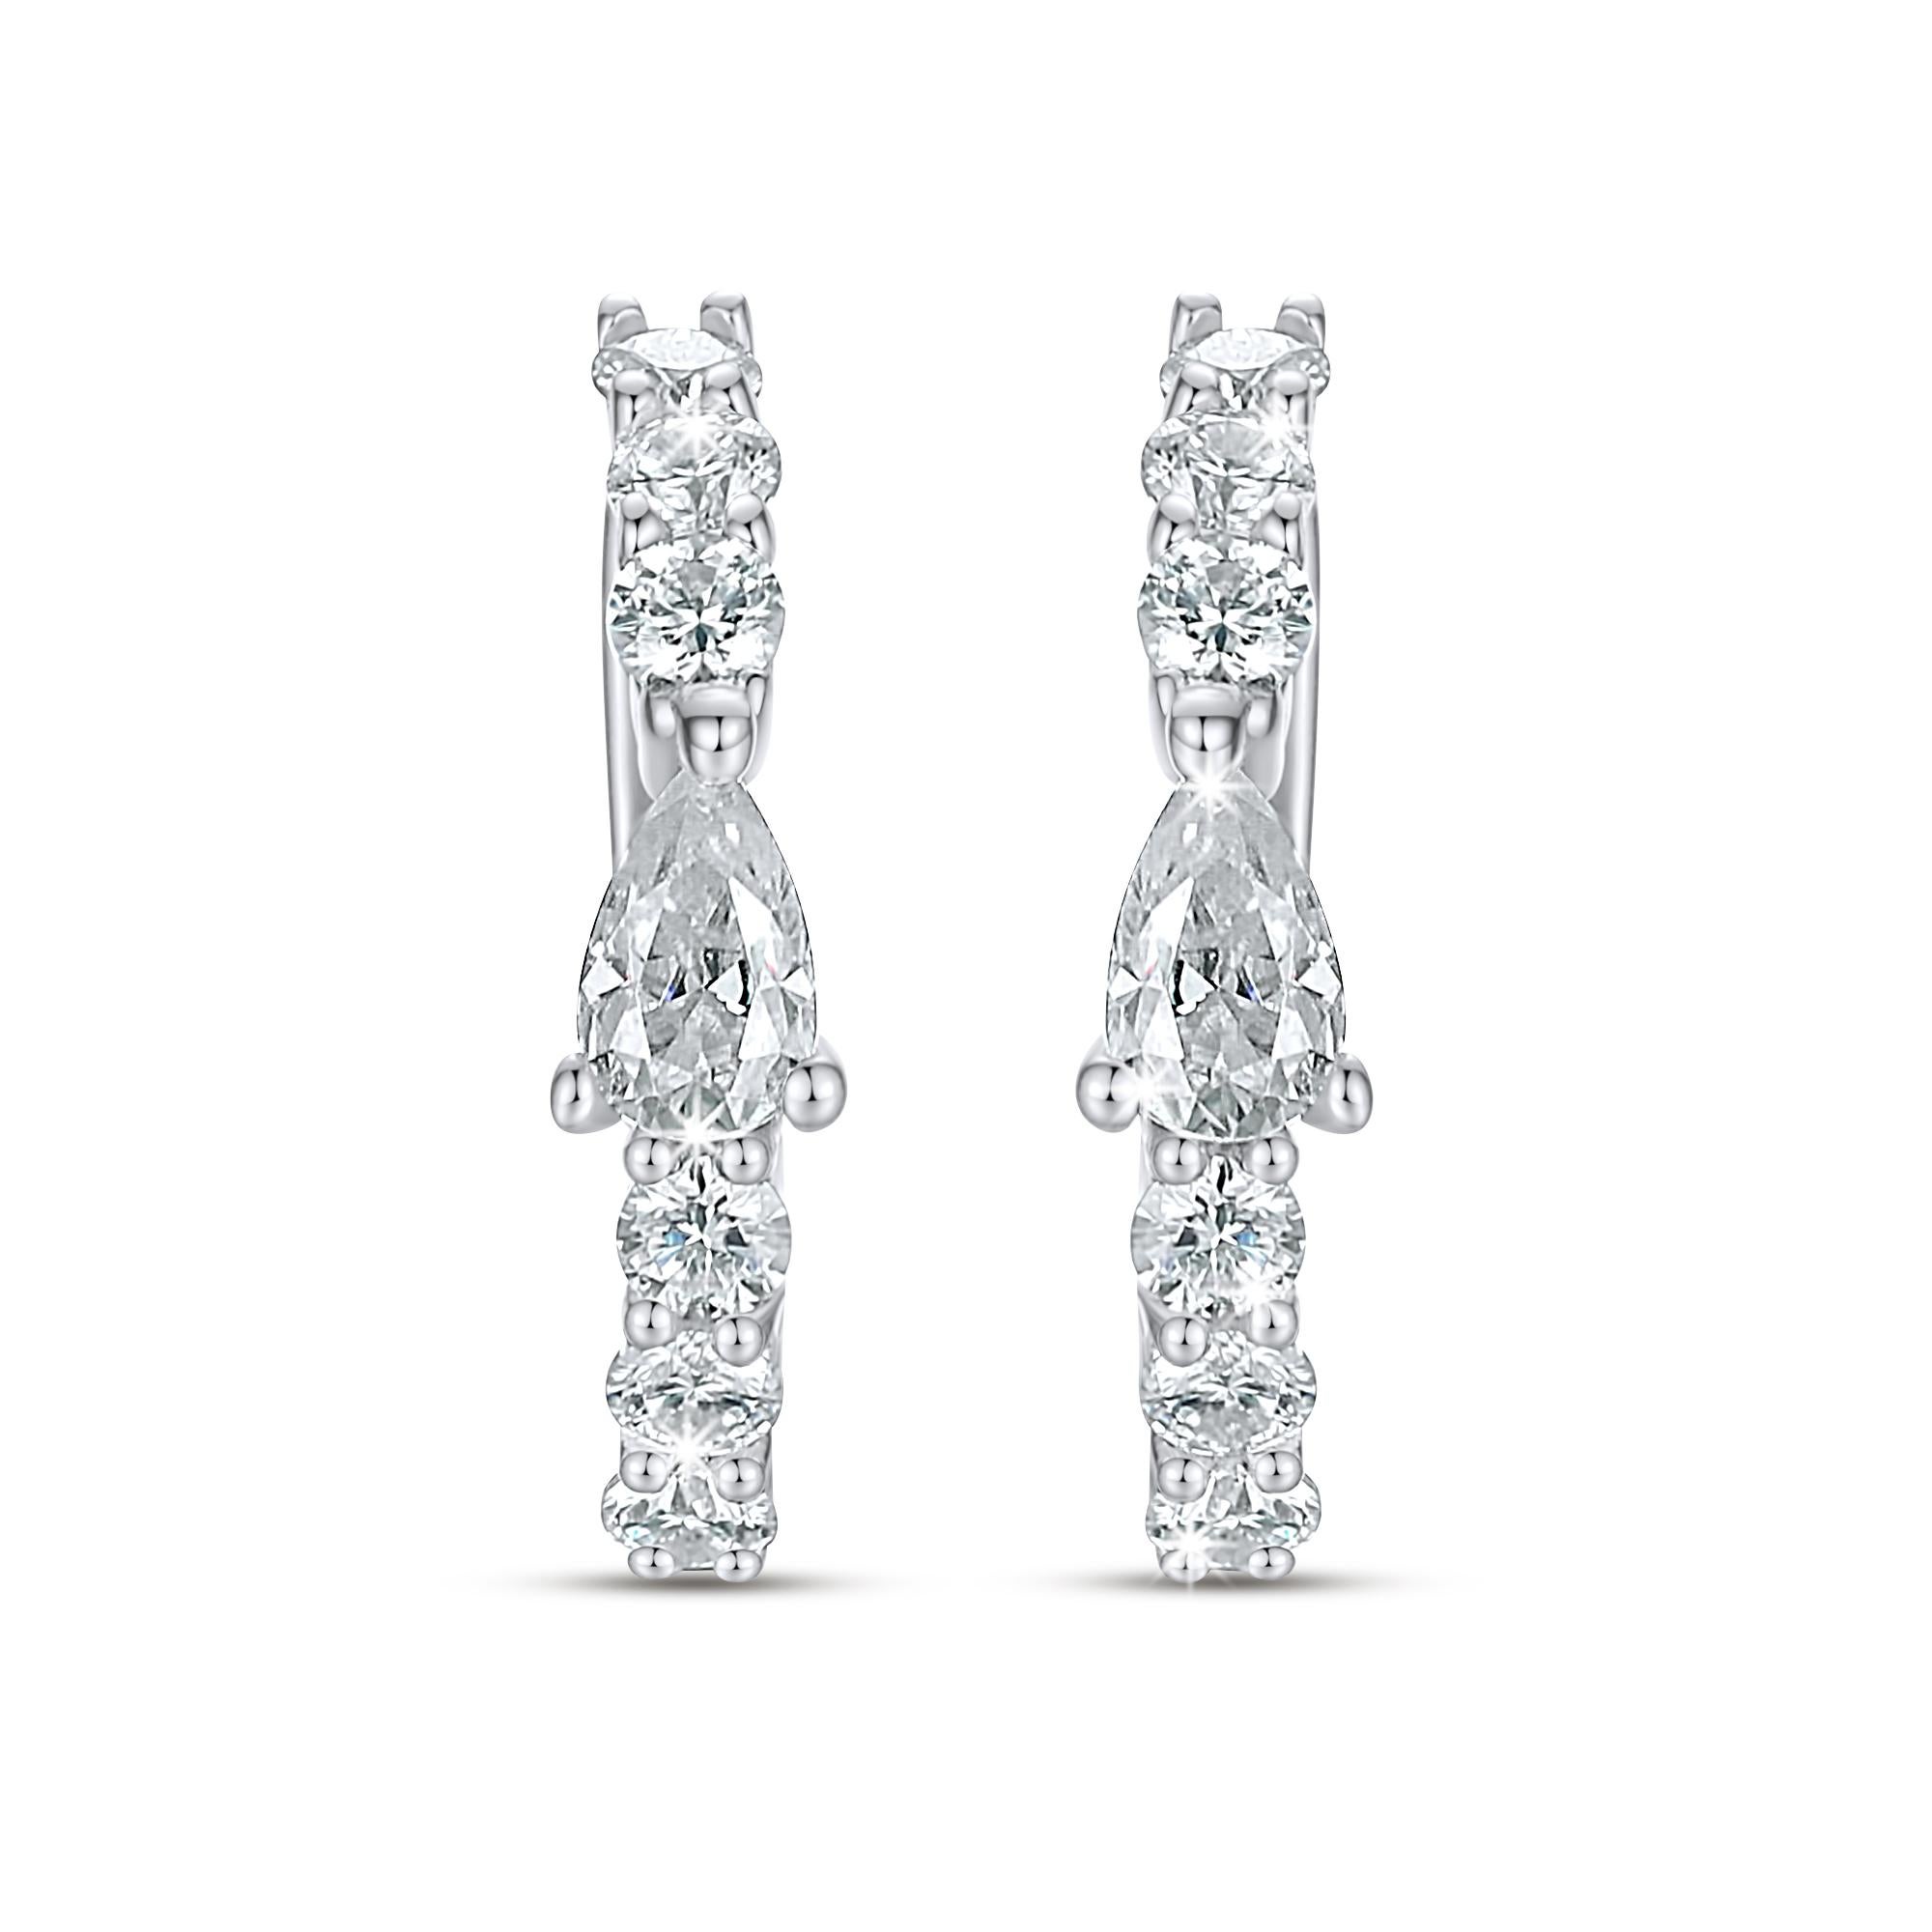 Enjoy sublime levels of sparkle with the Romancing Huggie earrings. A scintillating row of Natural channel set diamonds is topped off with an elegant cluster at the clasp. Celebrate your divine femininity by styling these 14K gold diamond huggie